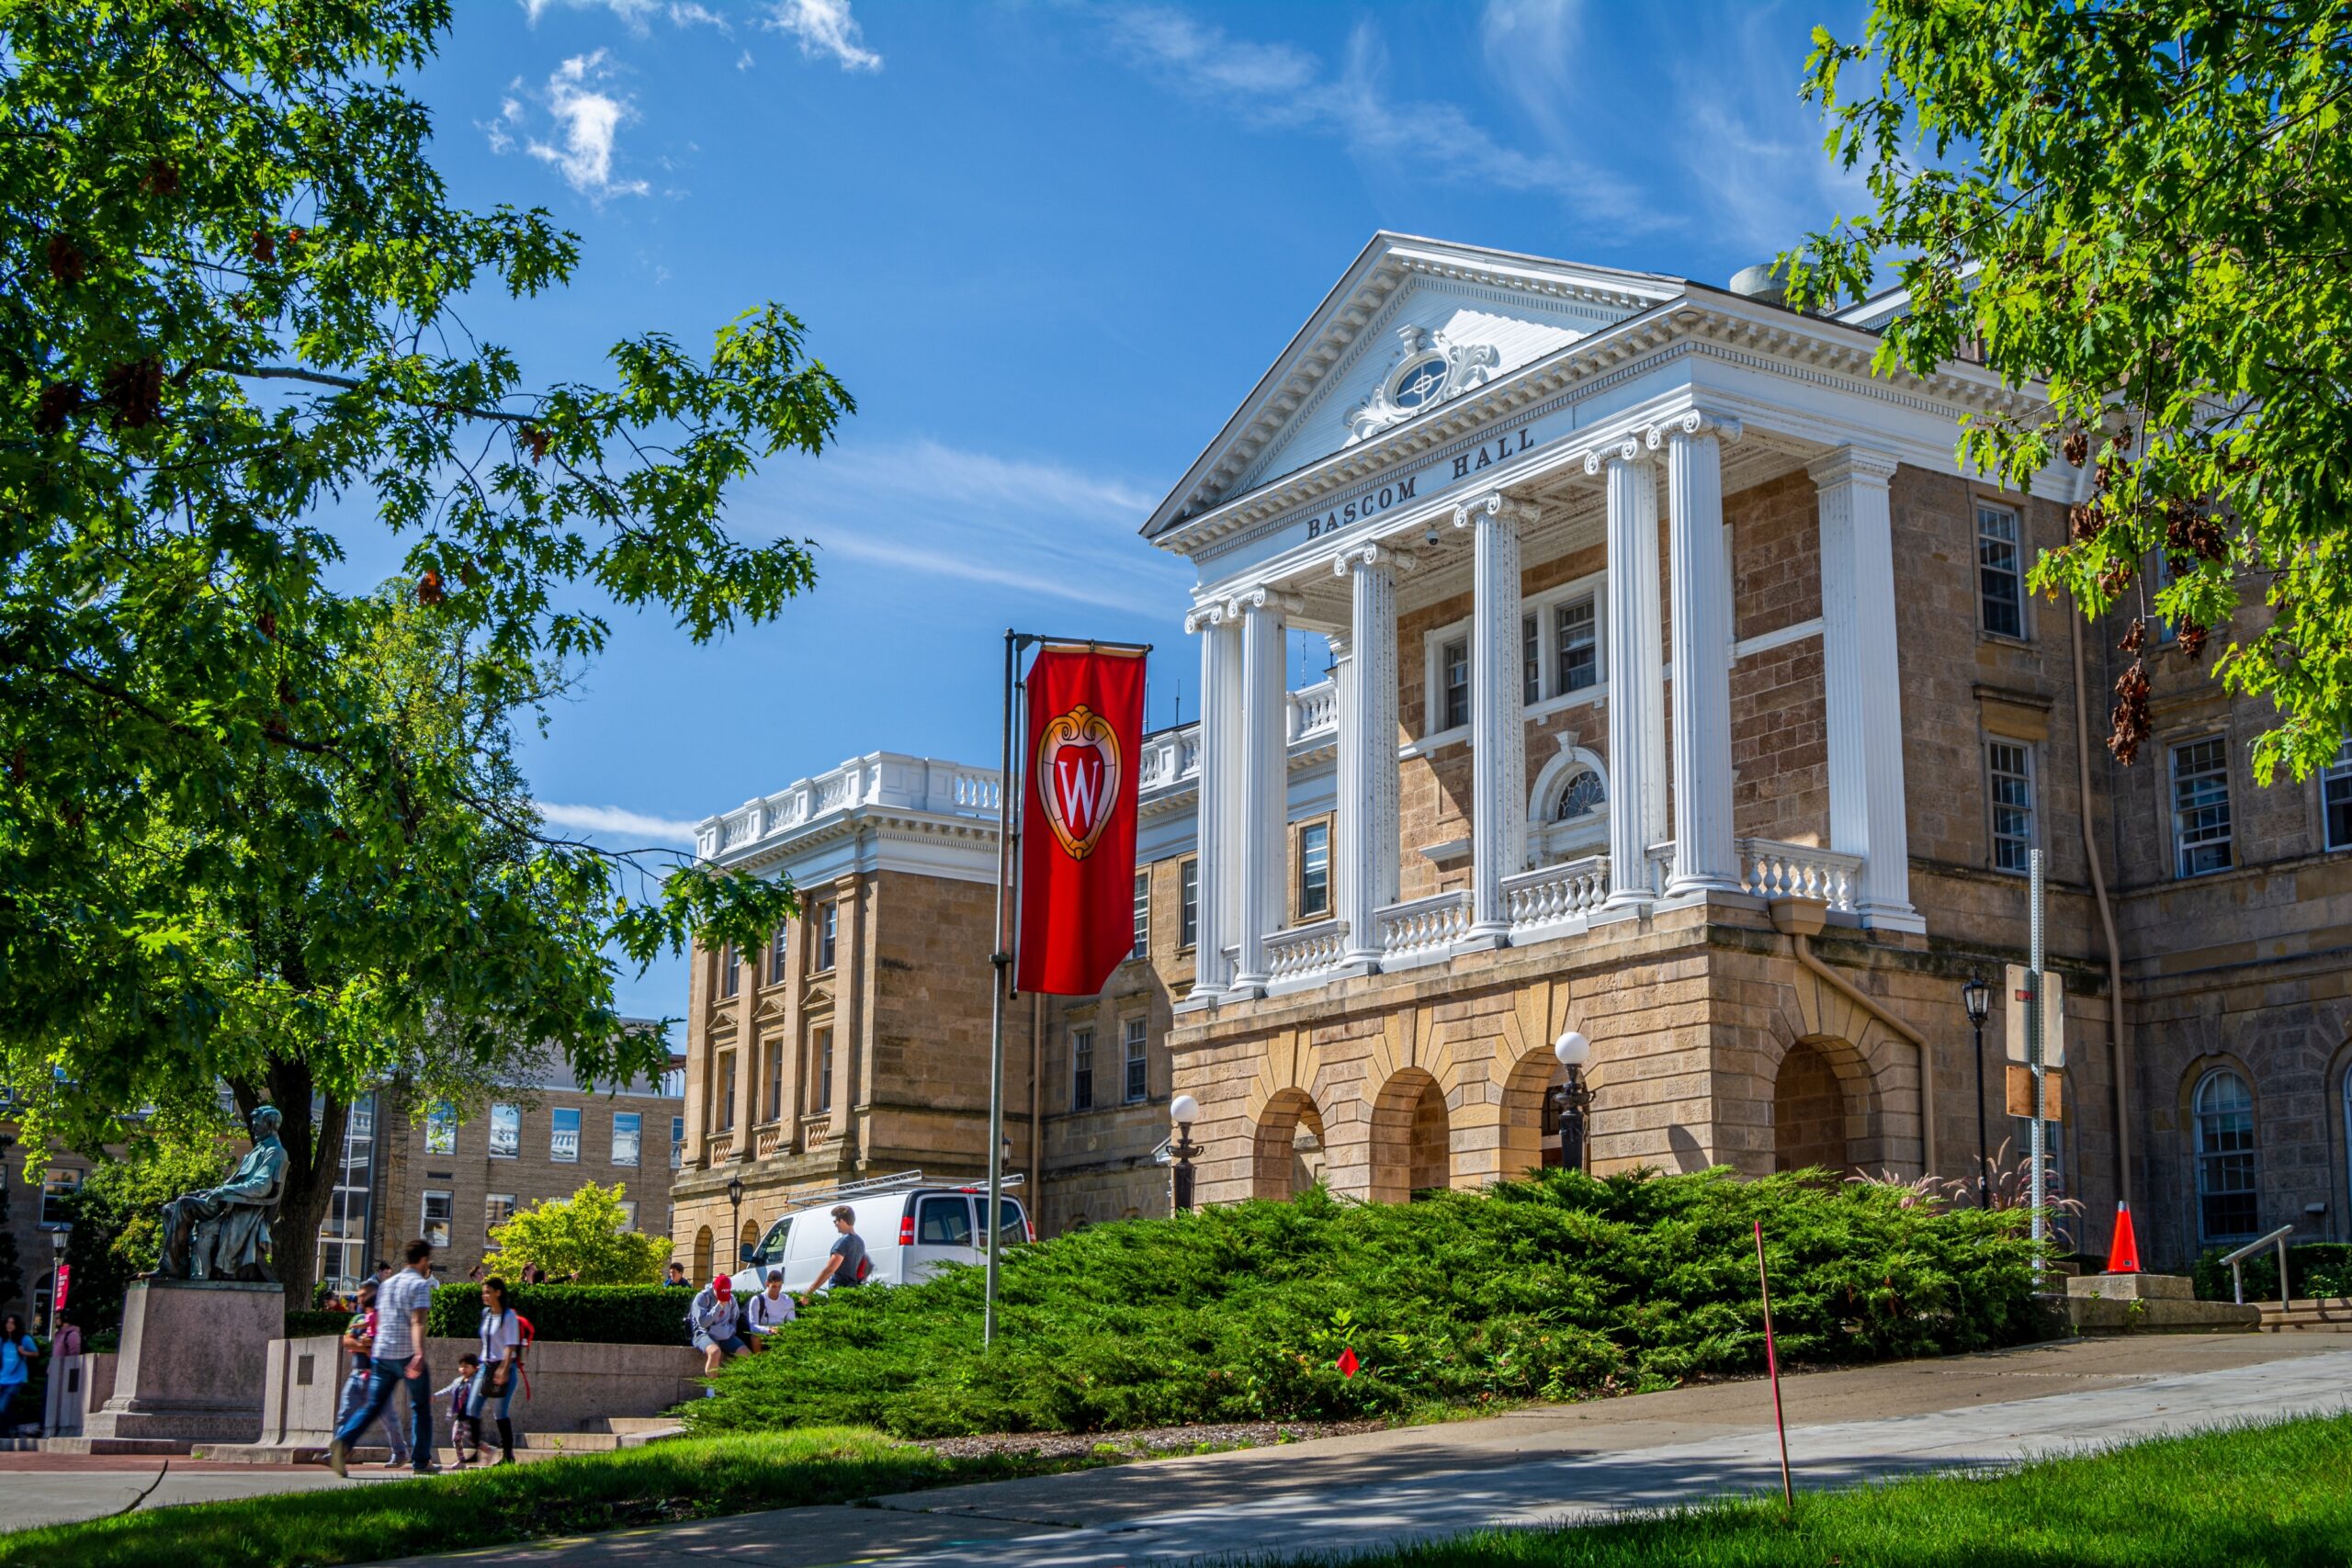 Bascom Hall, the main administrative building on the University of Wisconsin-Madison campus.